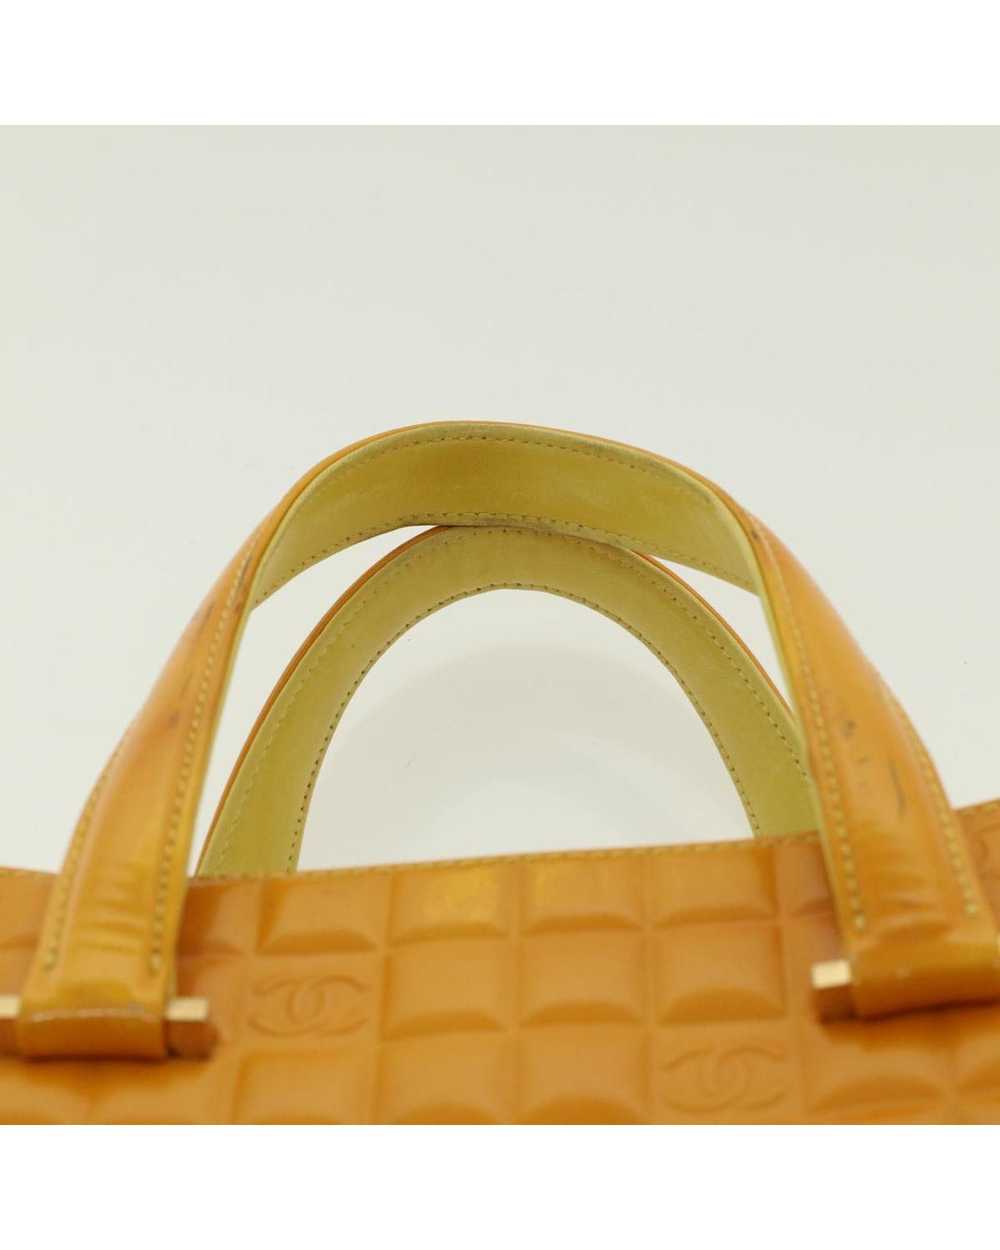 Chanel Yellow Patent Leather Hand Bag - image 8